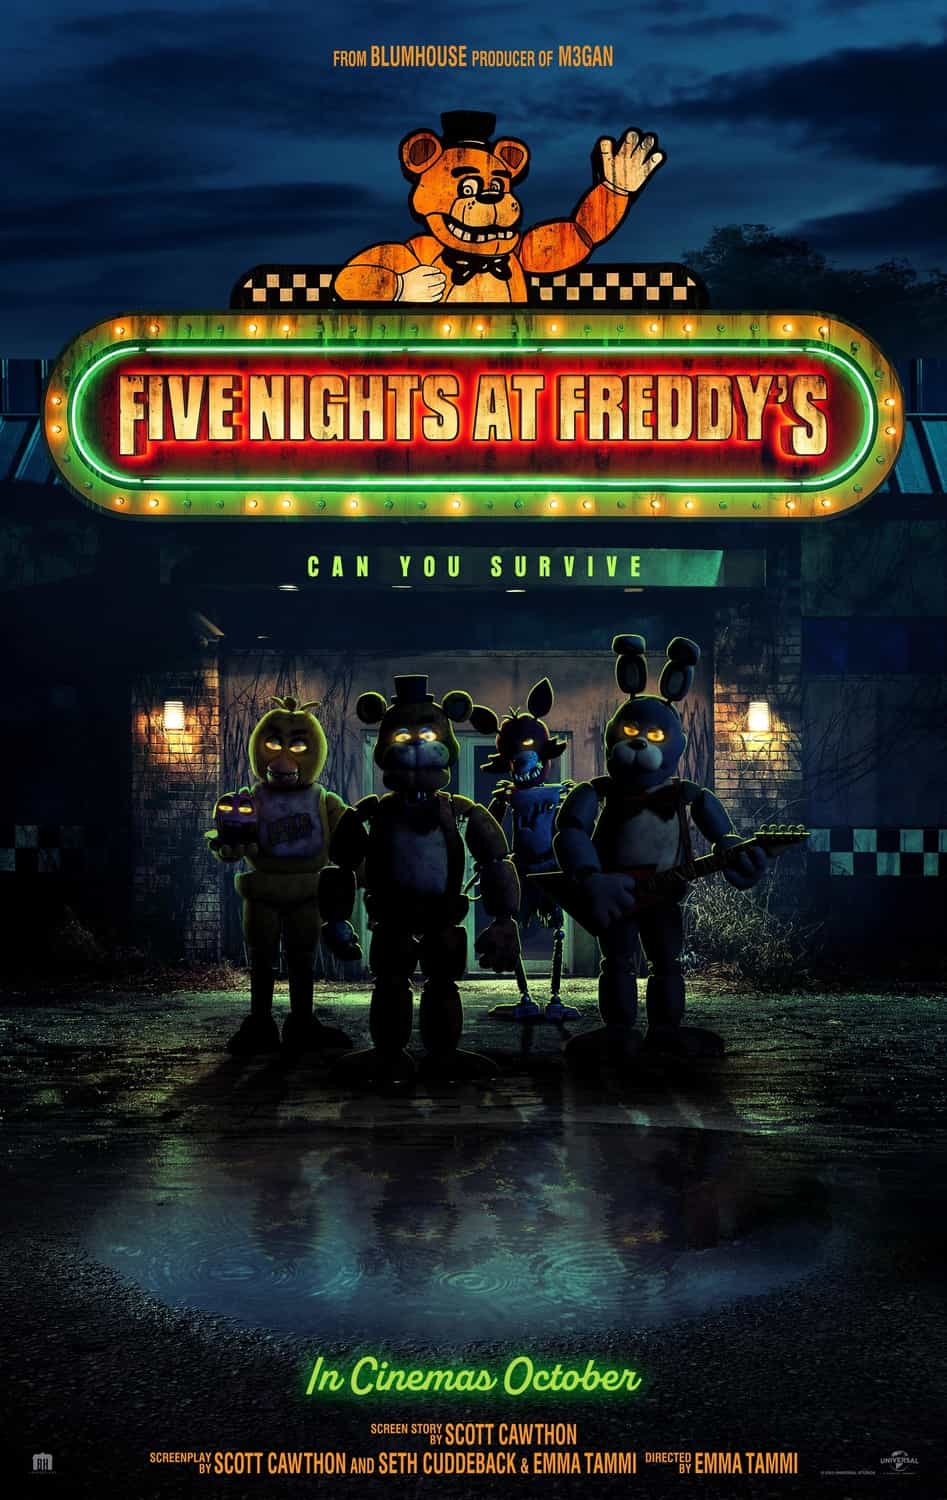 New poster has been released for Five Nights At Freddys which stars Josh Hutcherson and Matthew Lillard - movie UK release date 27th October 2023 #fivenightsatfreddys